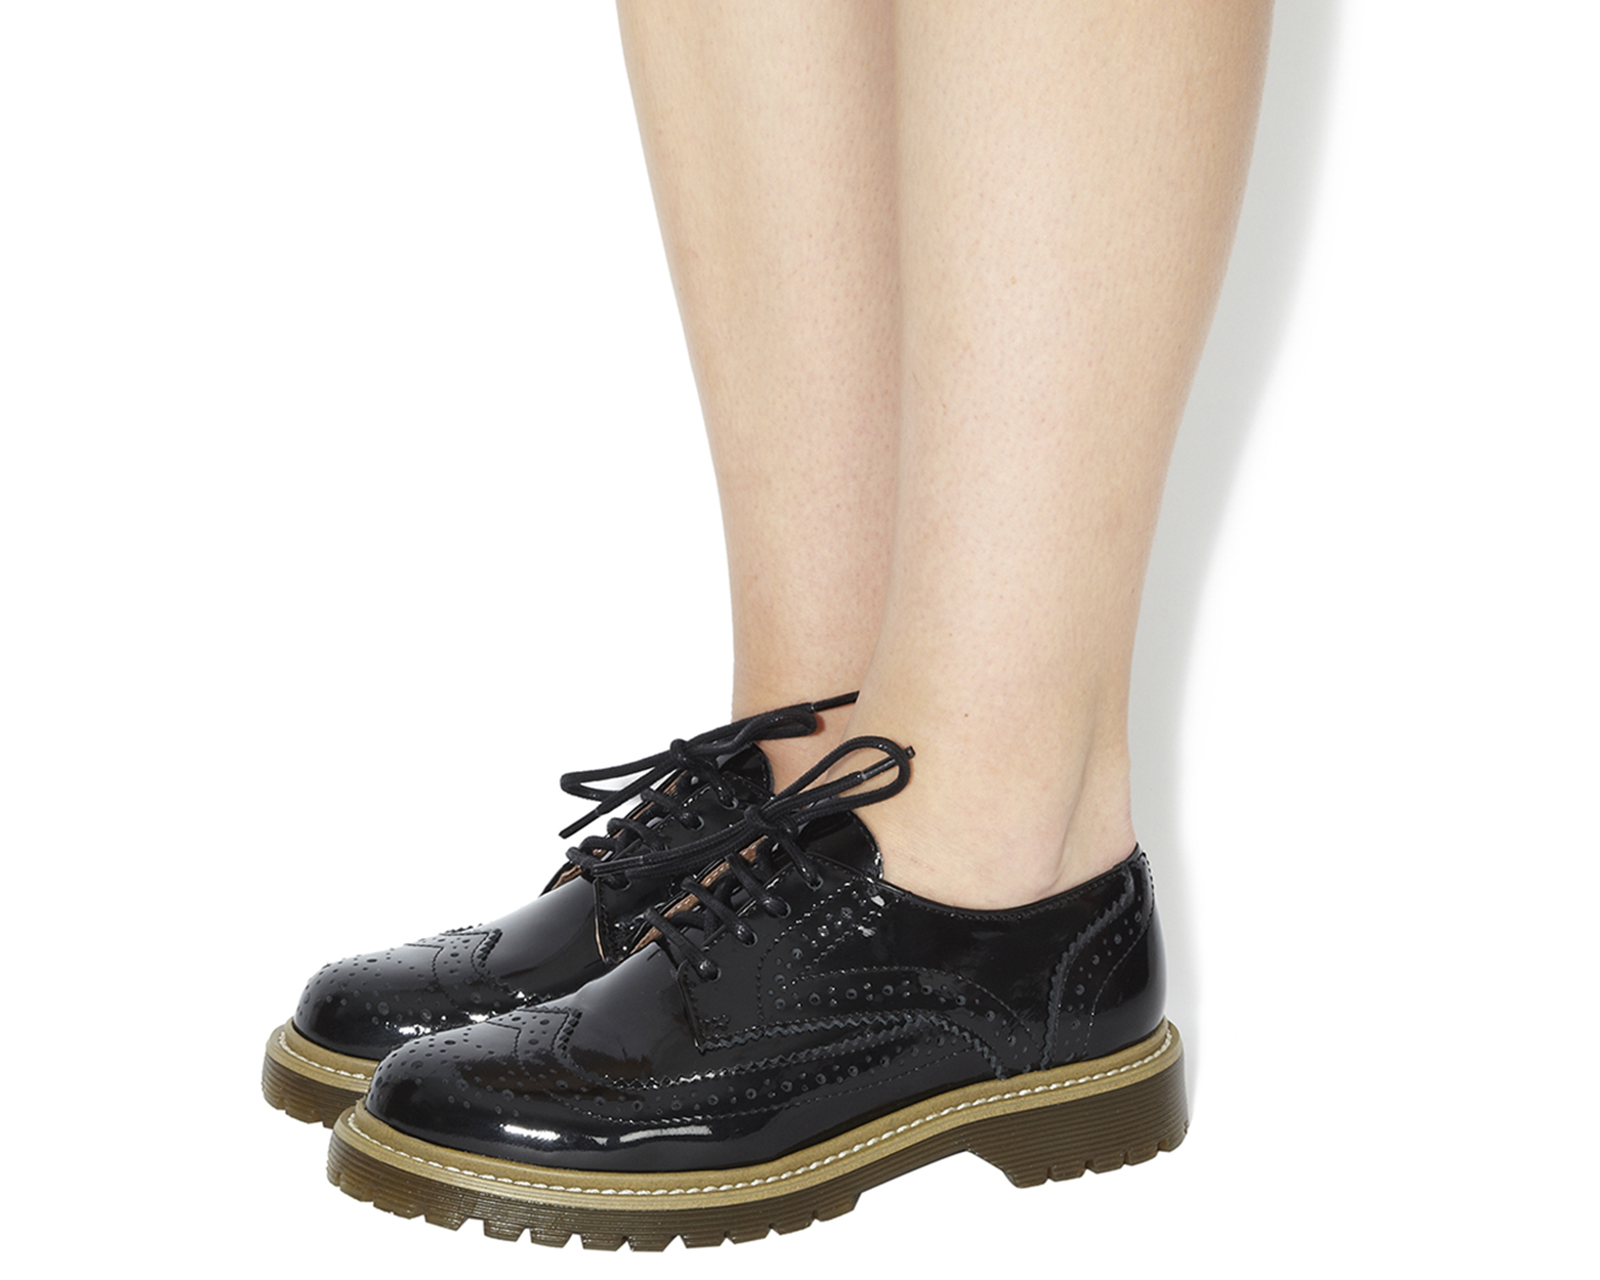 OFFICERush Hour Lace Up BroguesBlack Patent Leather